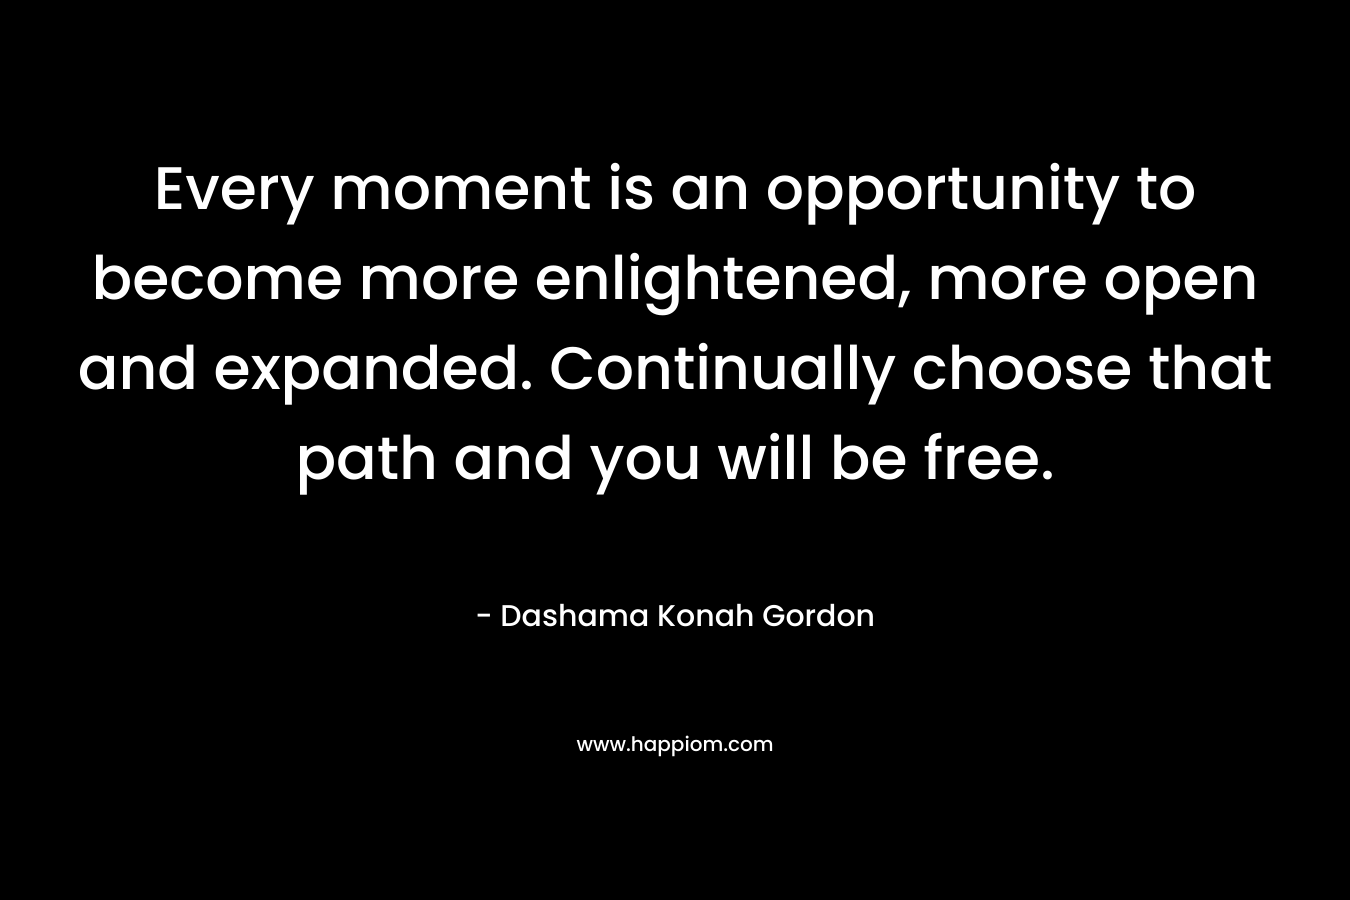 Every moment is an opportunity to become more enlightened, more open and expanded. Continually choose that path and you will be free. – Dashama Konah Gordon